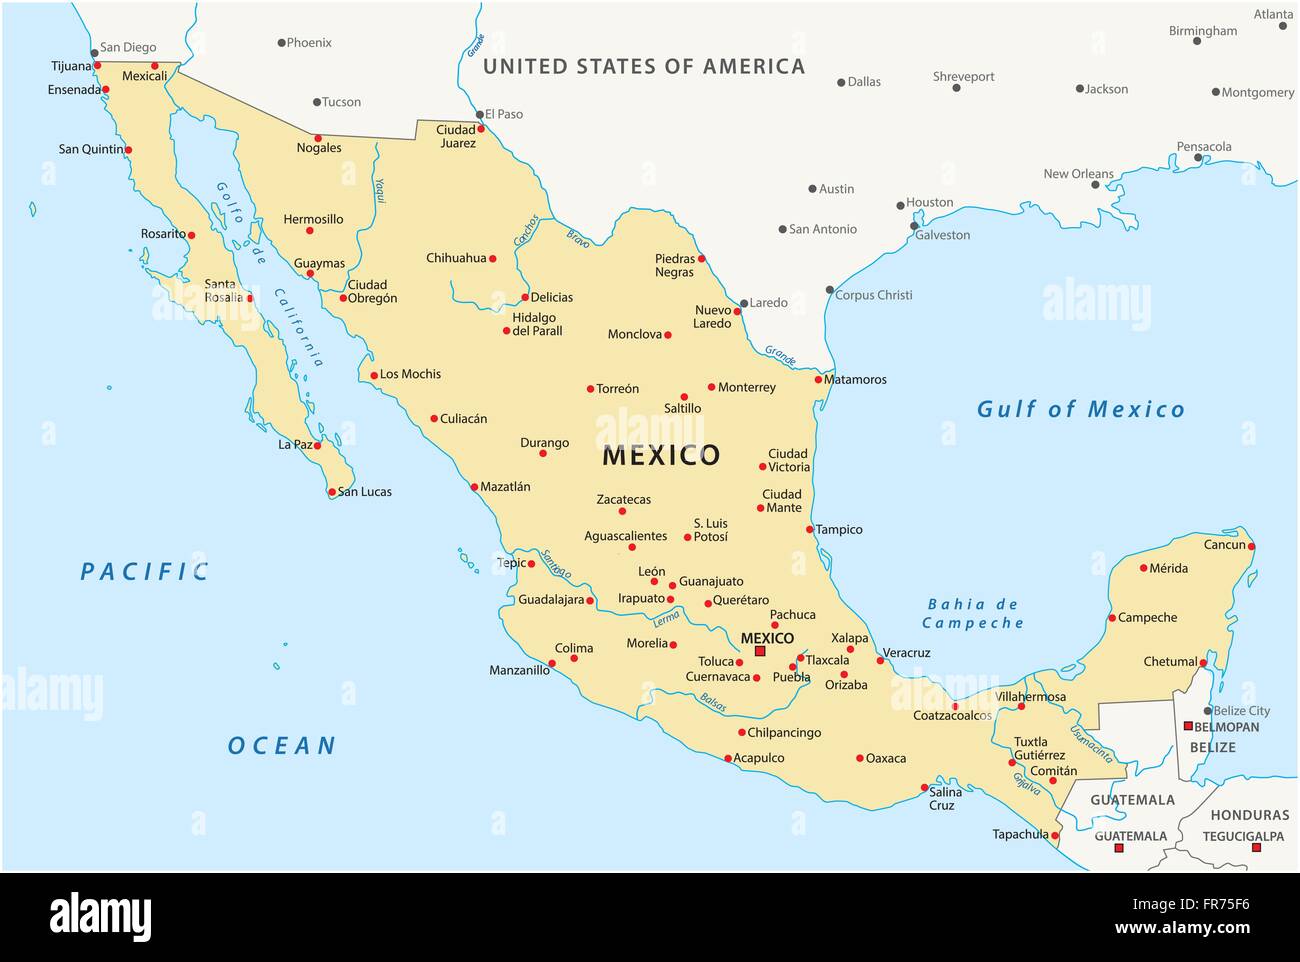 Us Mexico Border Cities Map